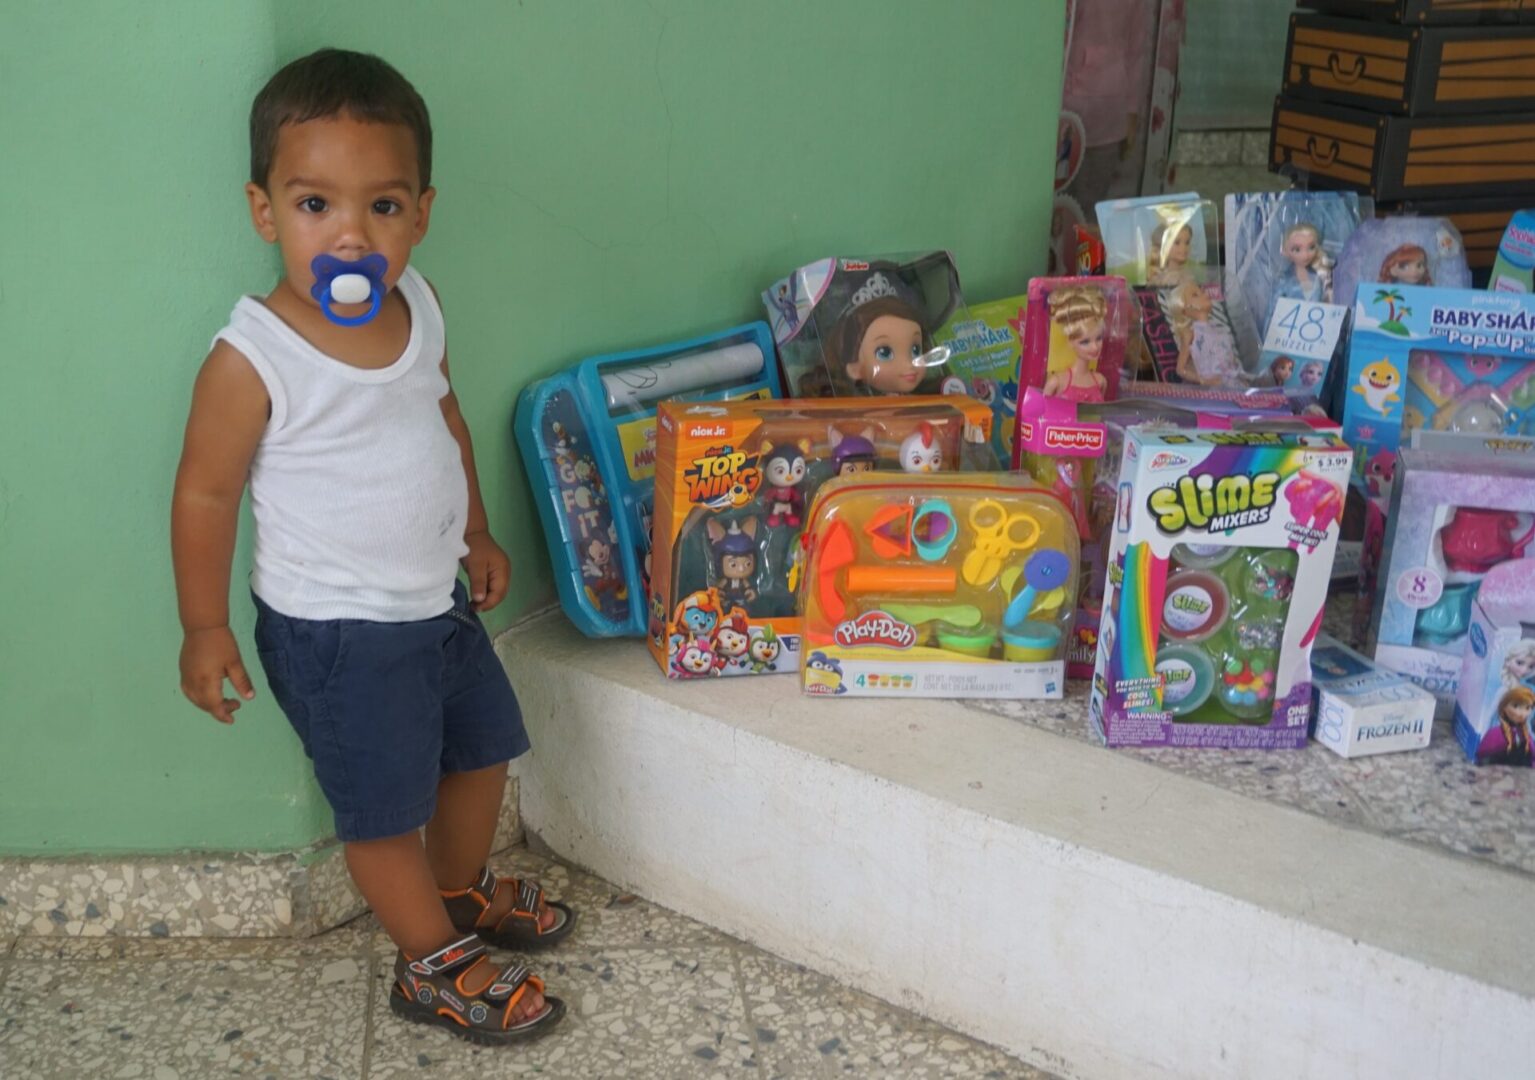 A little boy with a pacifier standing near the platform full of toys